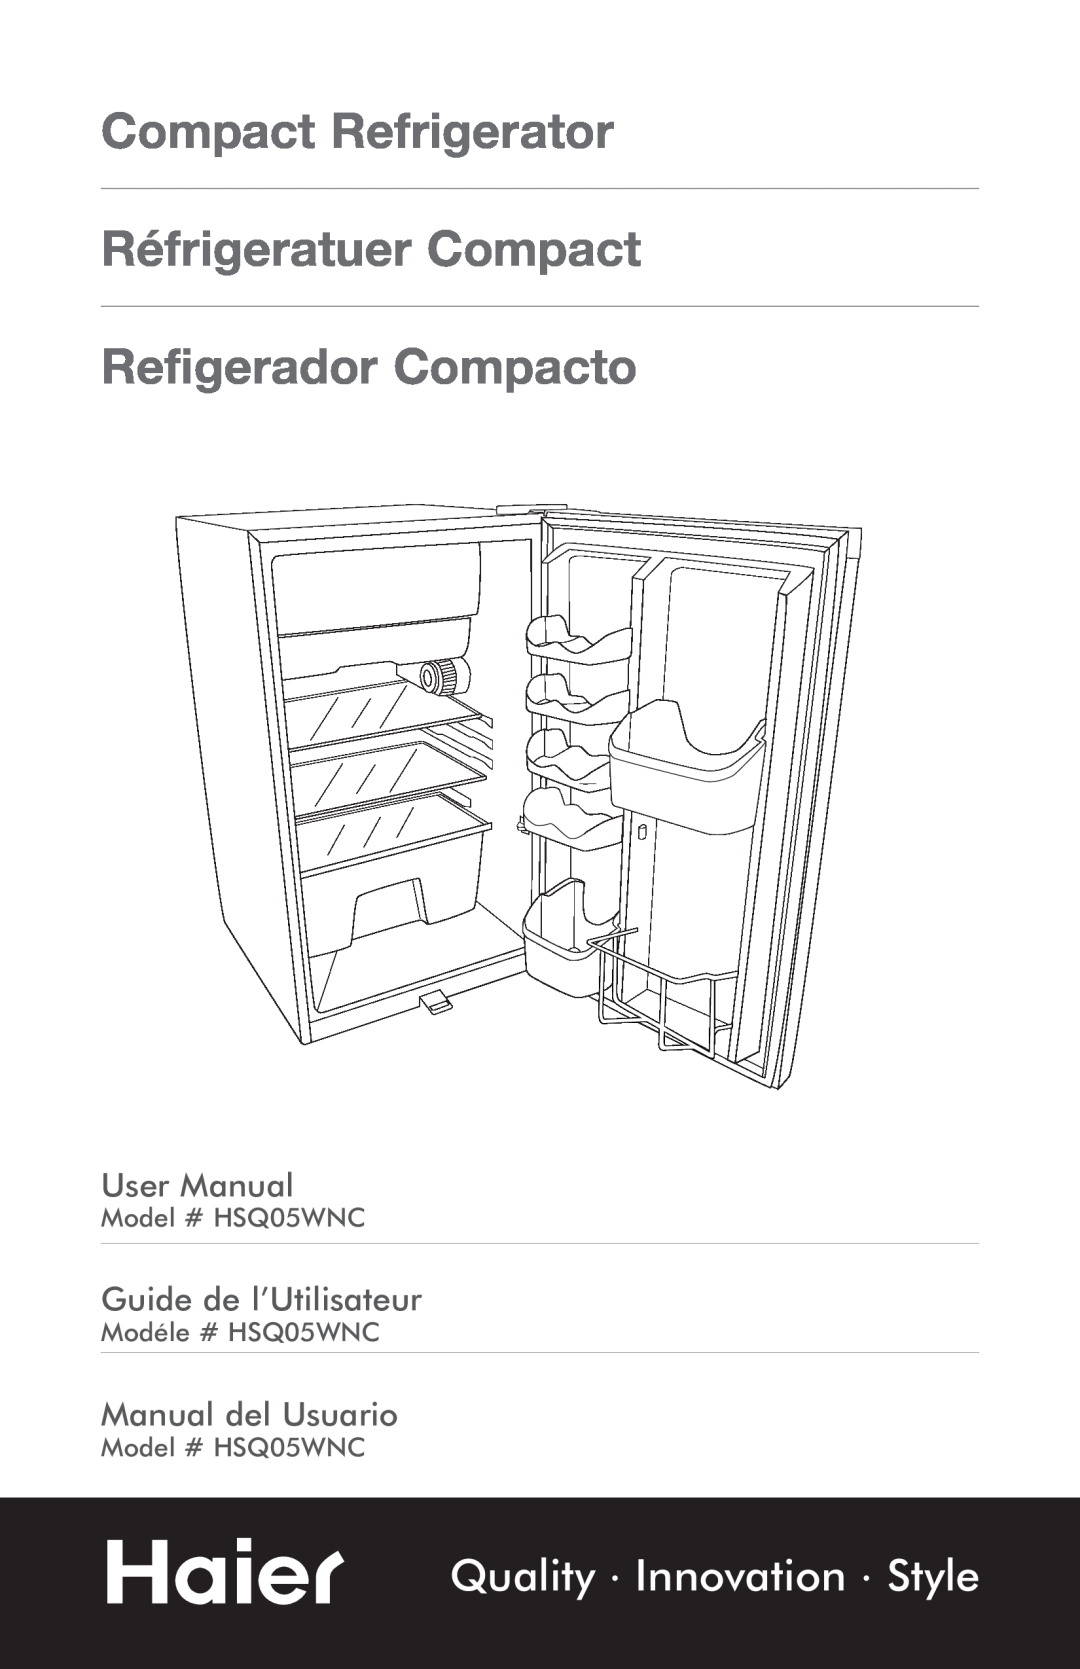 Haier HSQ05WNC user manual Compact Refrigerator Réfrigeratuer Compact Refigerador Compacto, Quality Innovation Style 